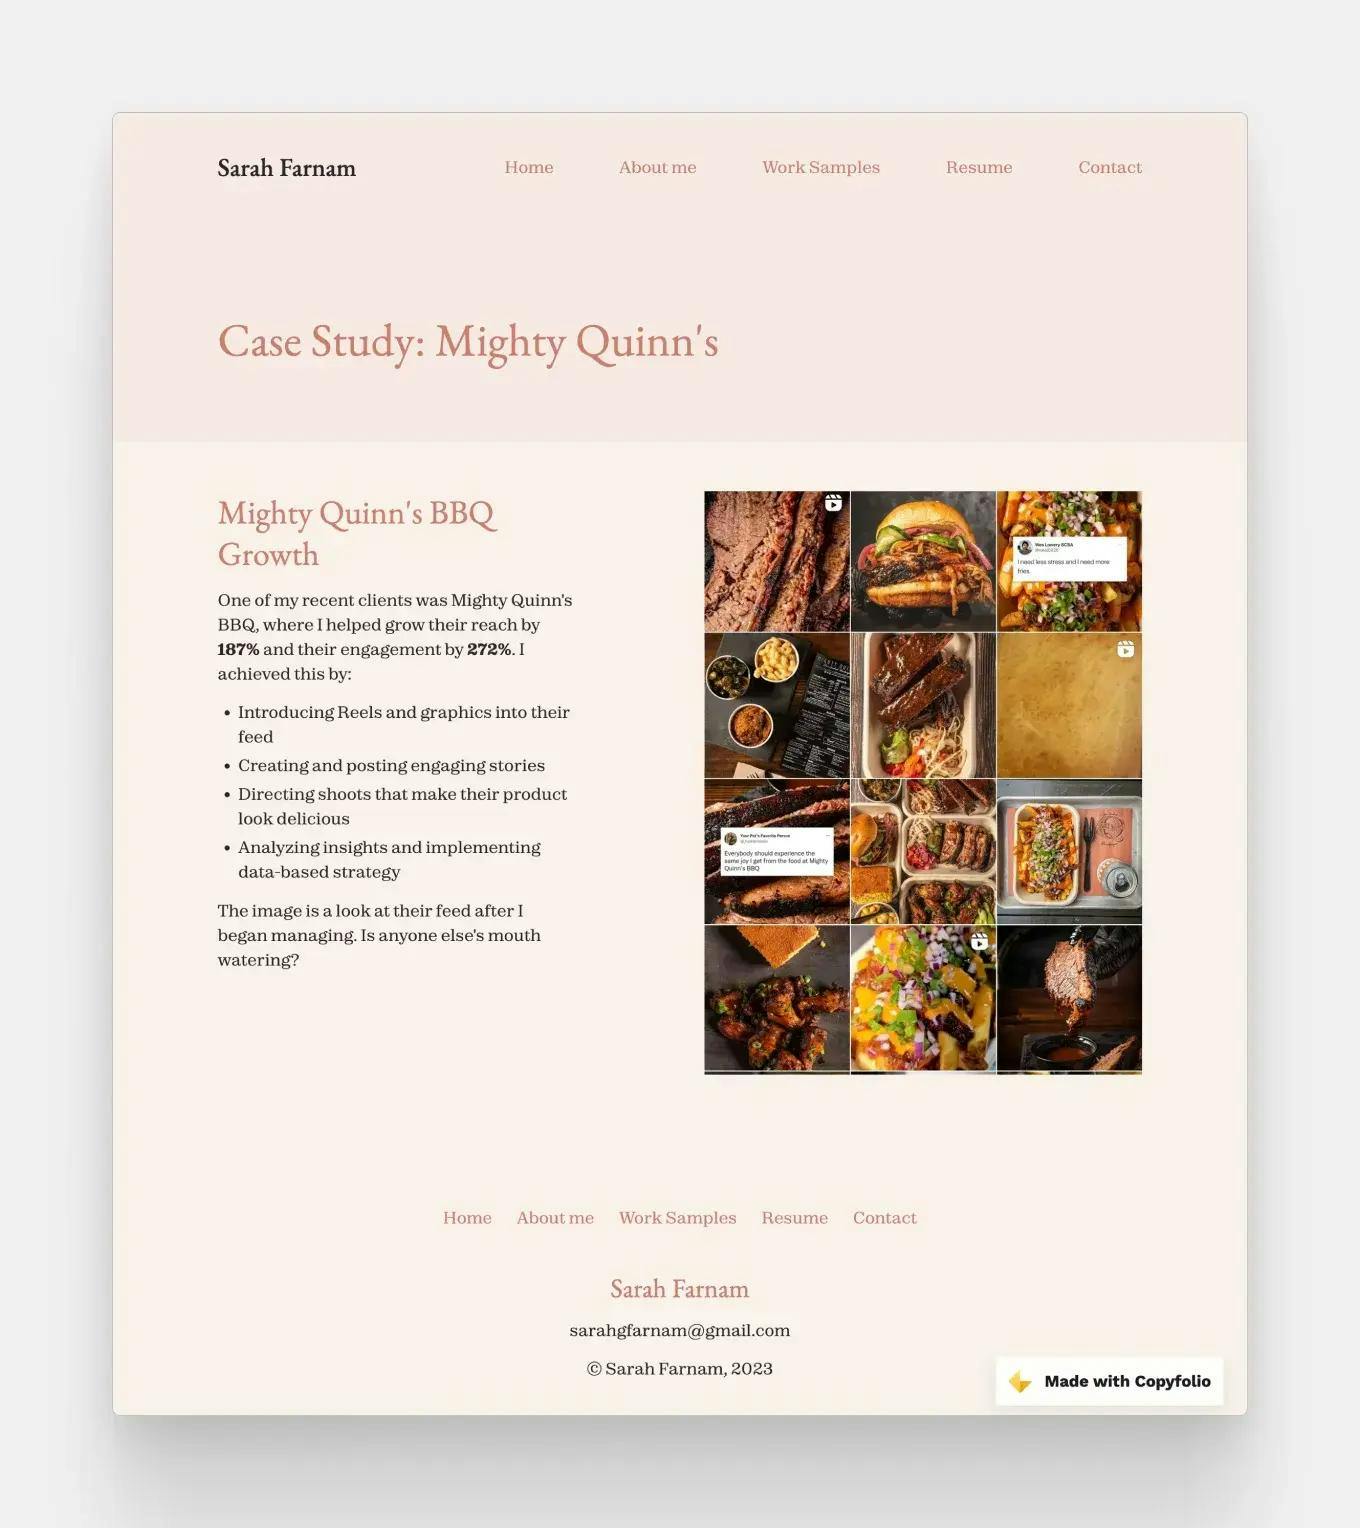 Sarah's social media case study on the work she did on the Instagram page of Mighty Quinn's BBQ